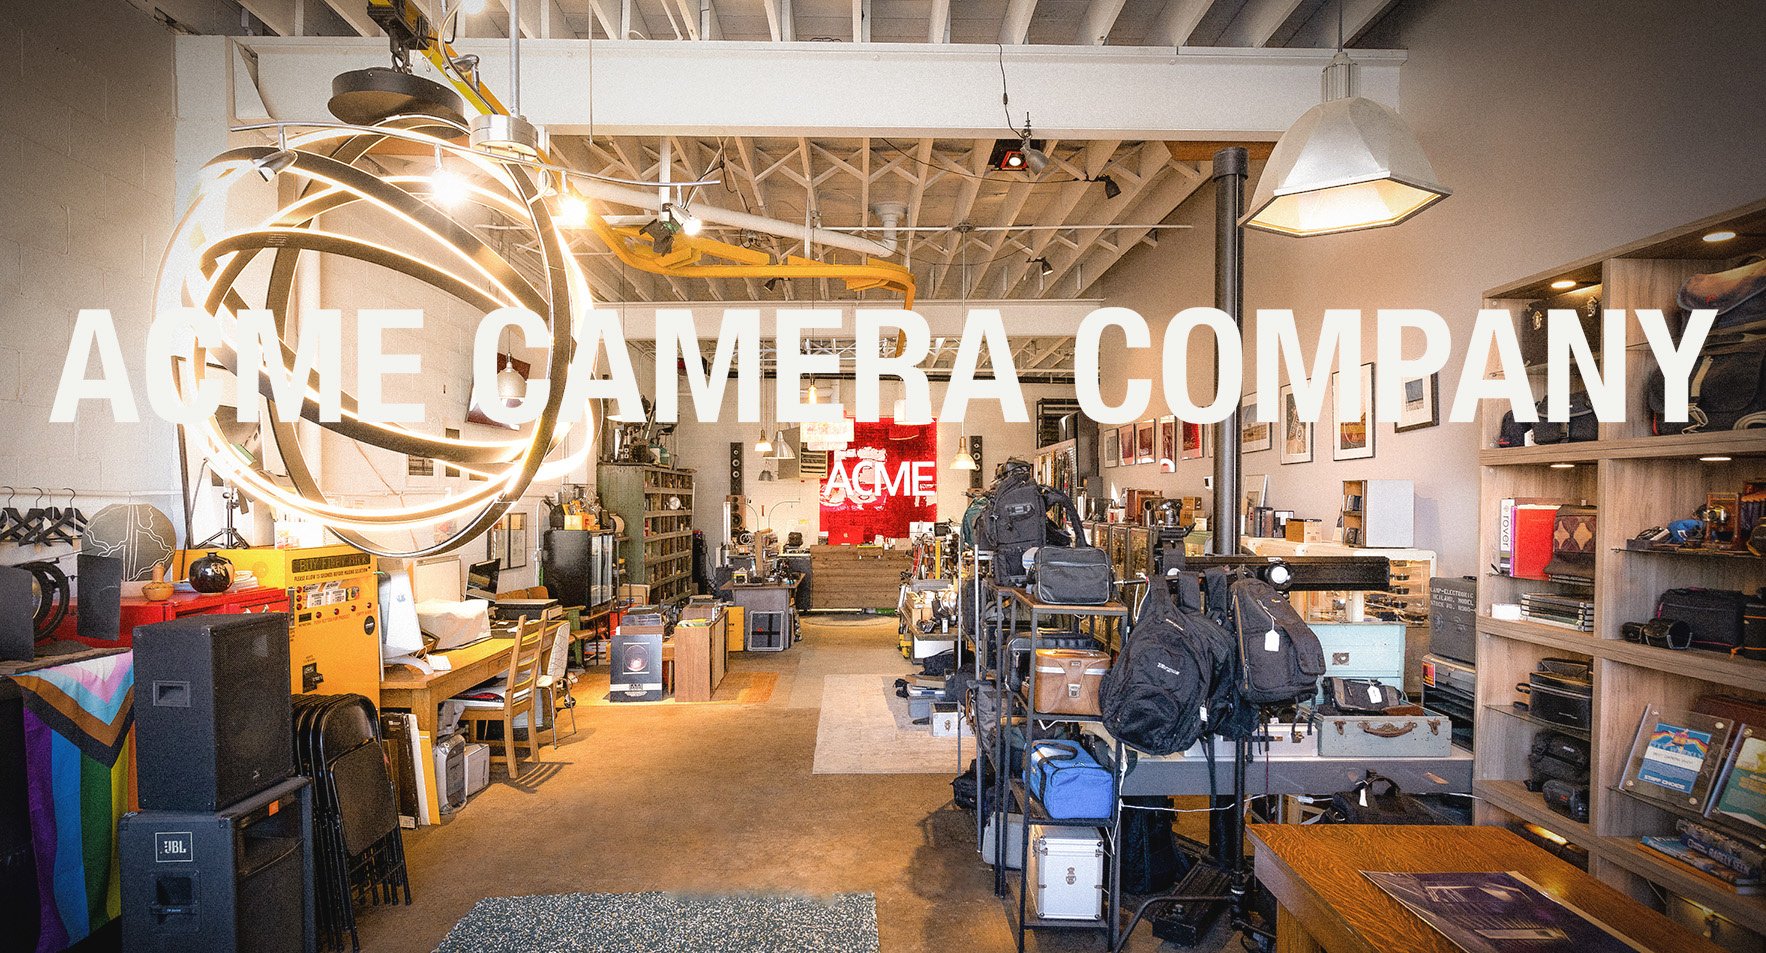 Who is Acme Camera Co.?